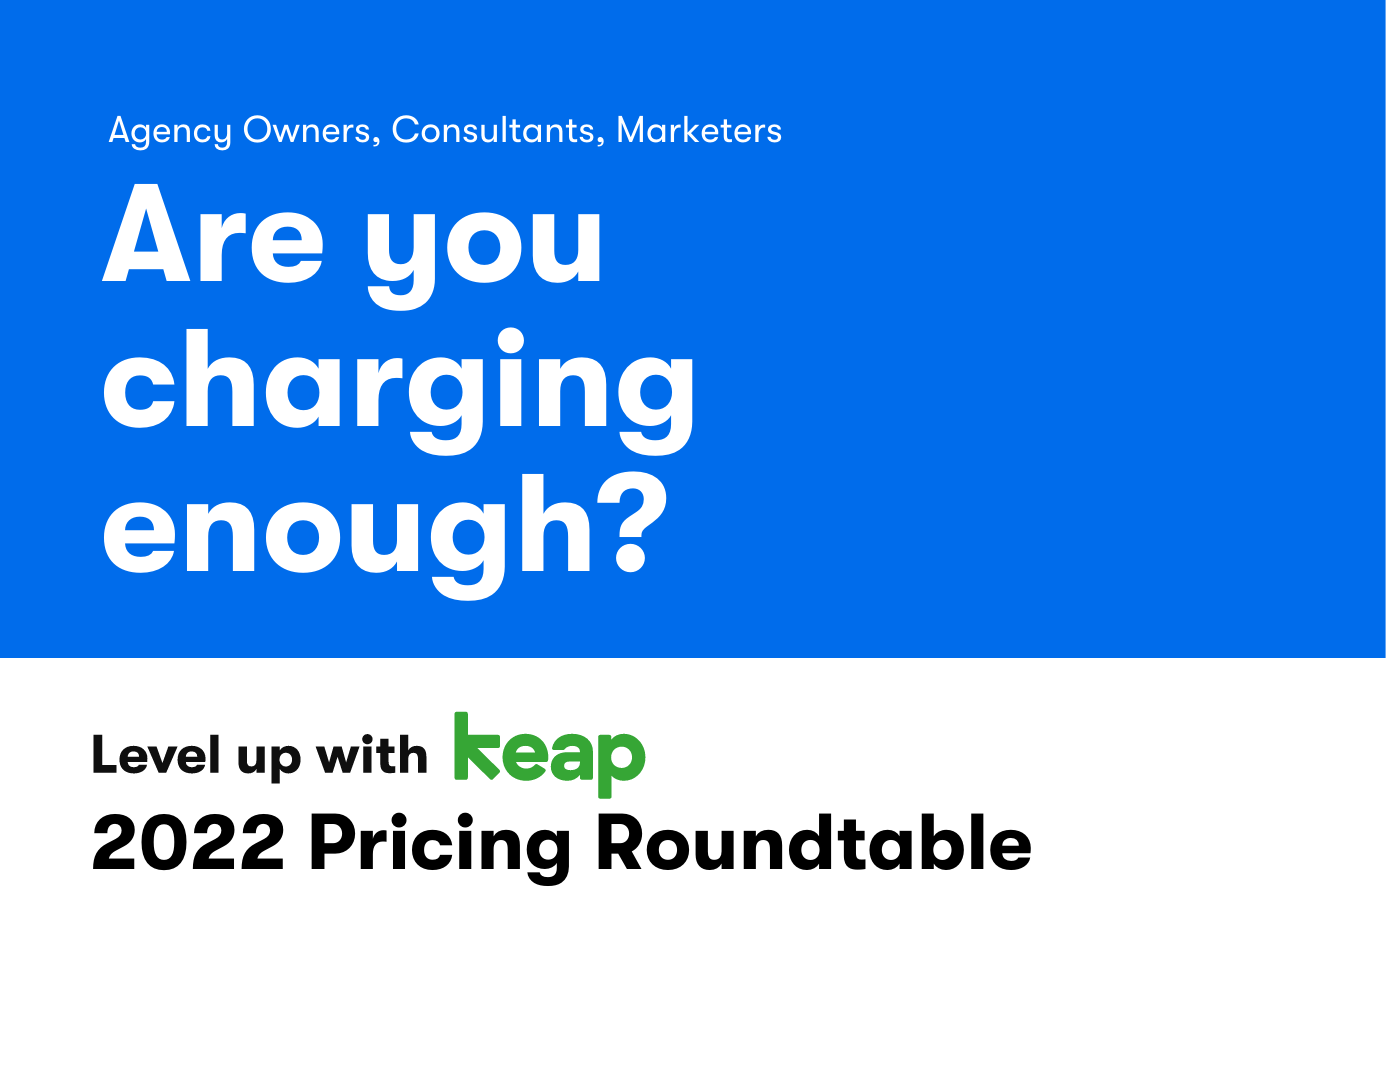 Level Up with Keap: 2022 Pricing Roundtable